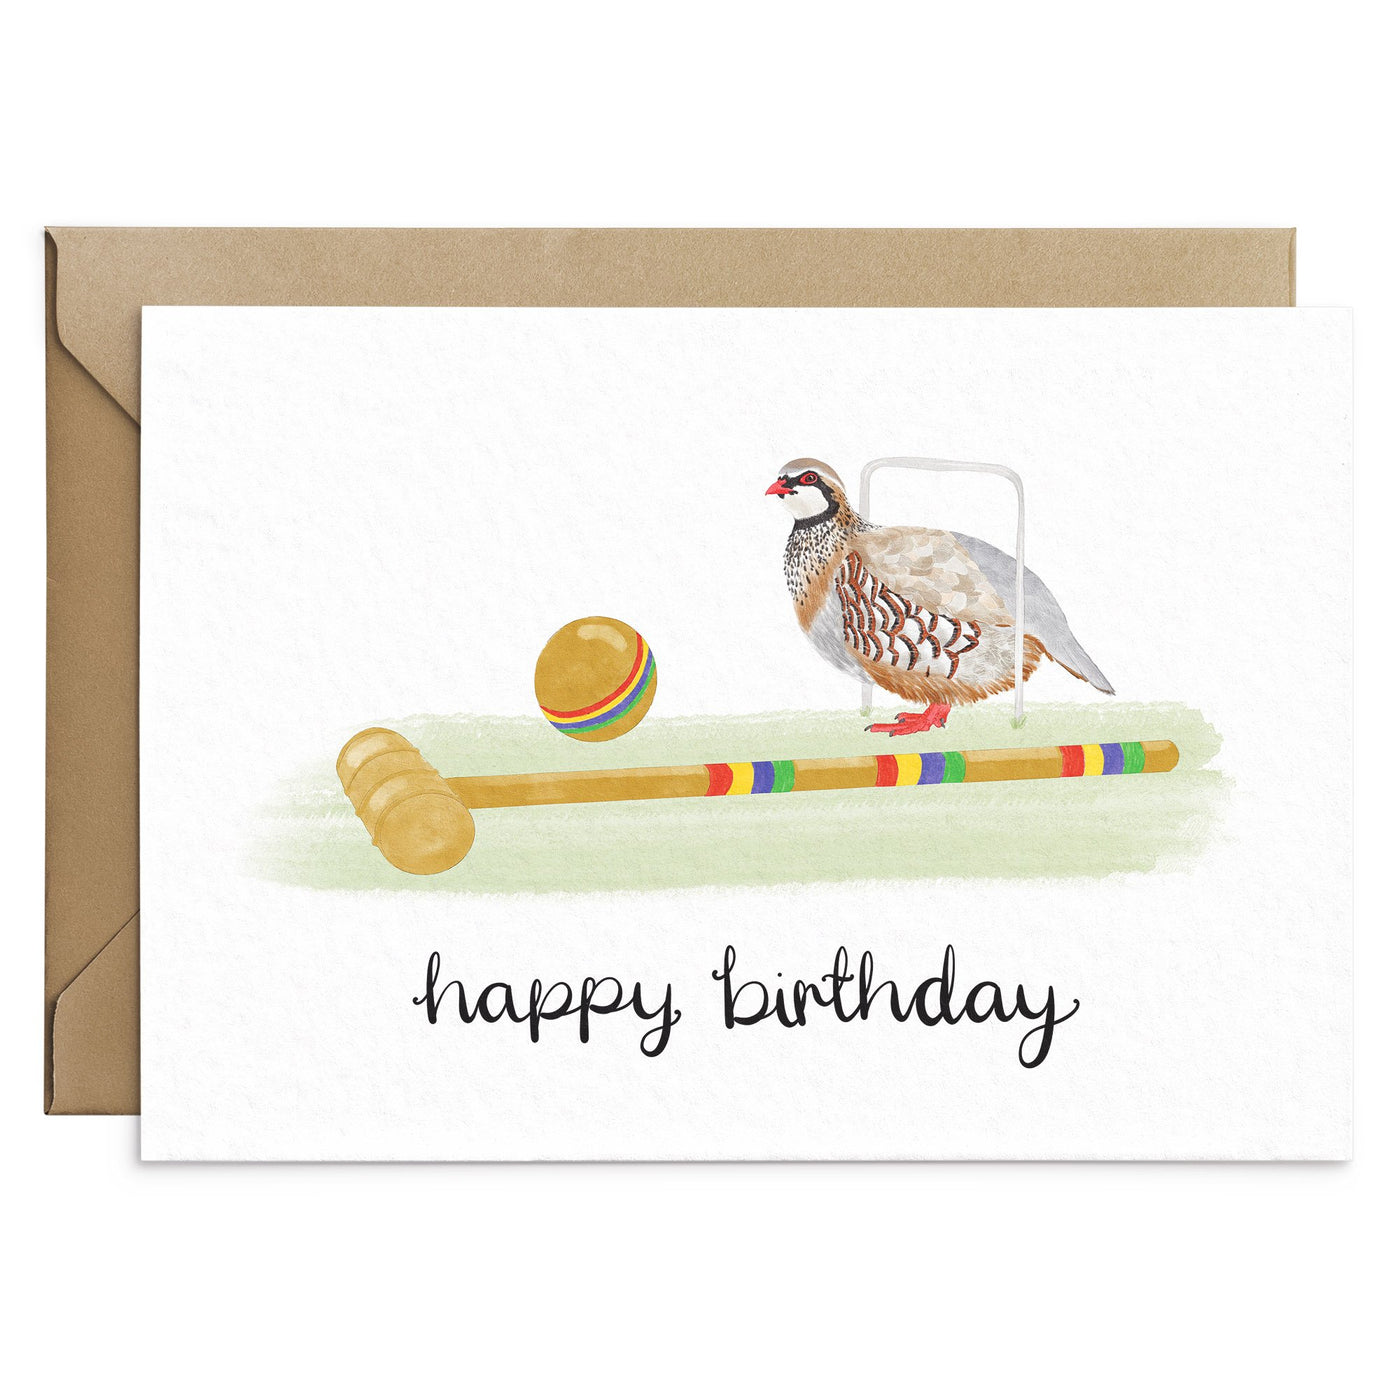 Funny Partridge Birthday Card - Poppins & Co.